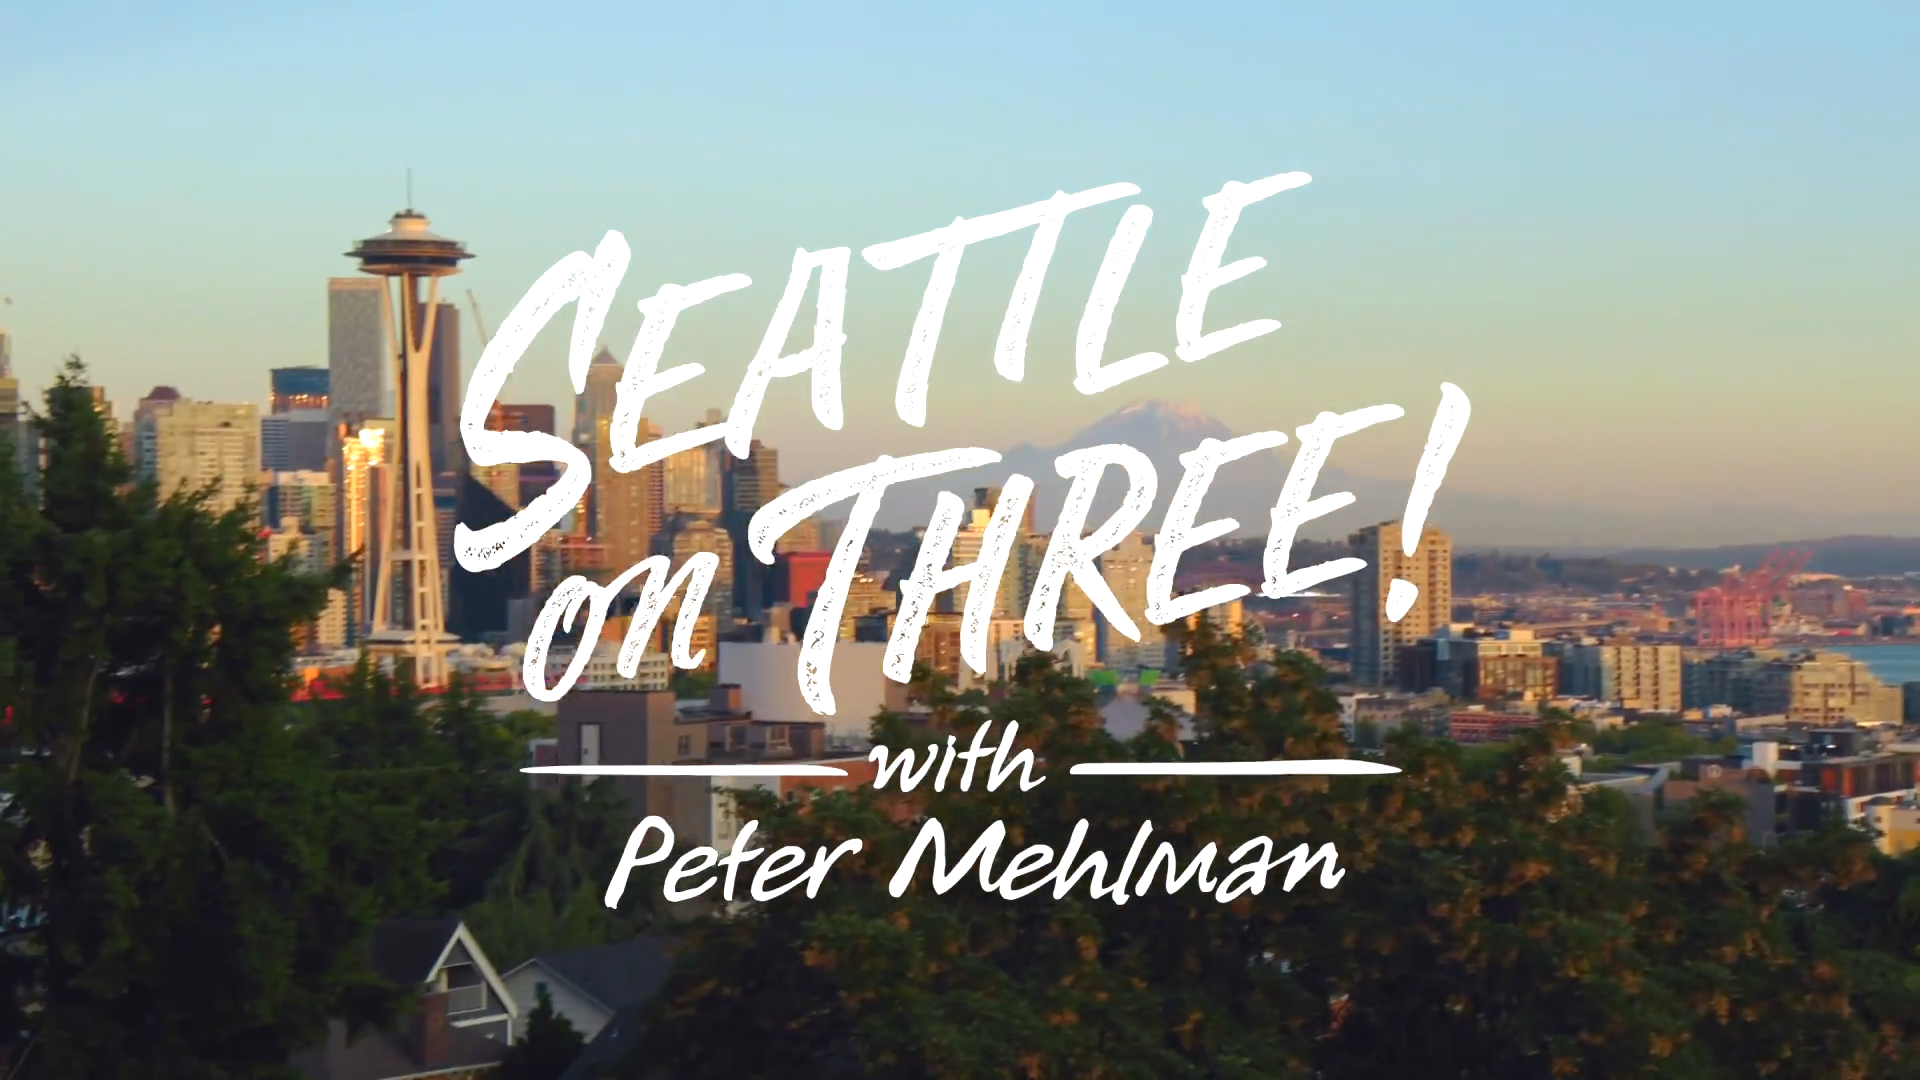 Seattle on Three with Peter Mehlman Trailer